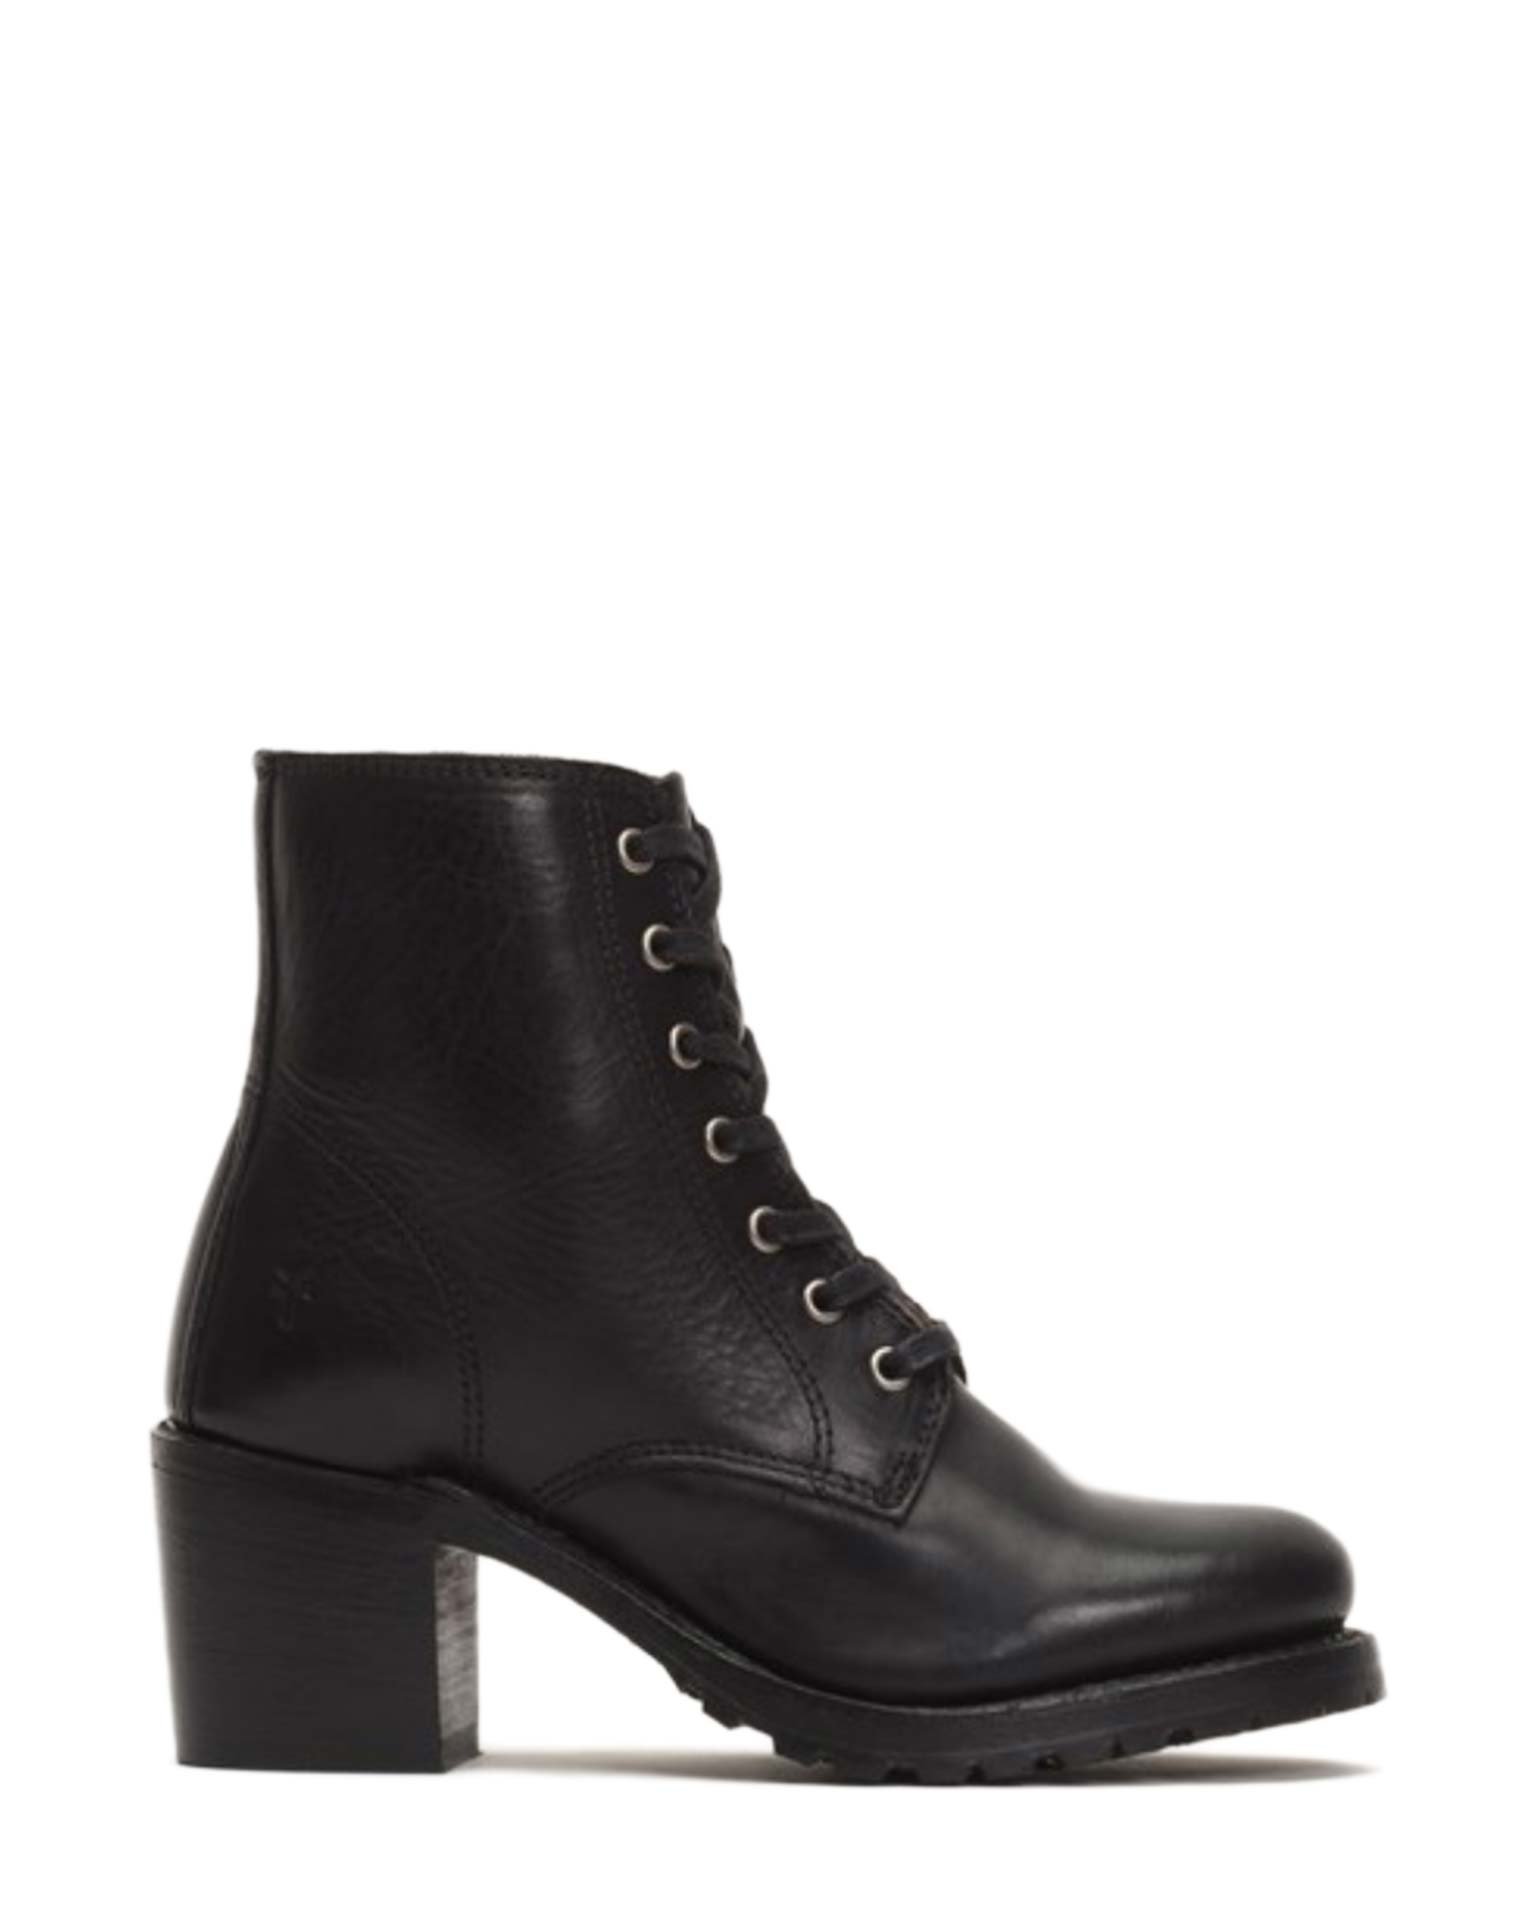 Sabrina 6G Lace Up in Black